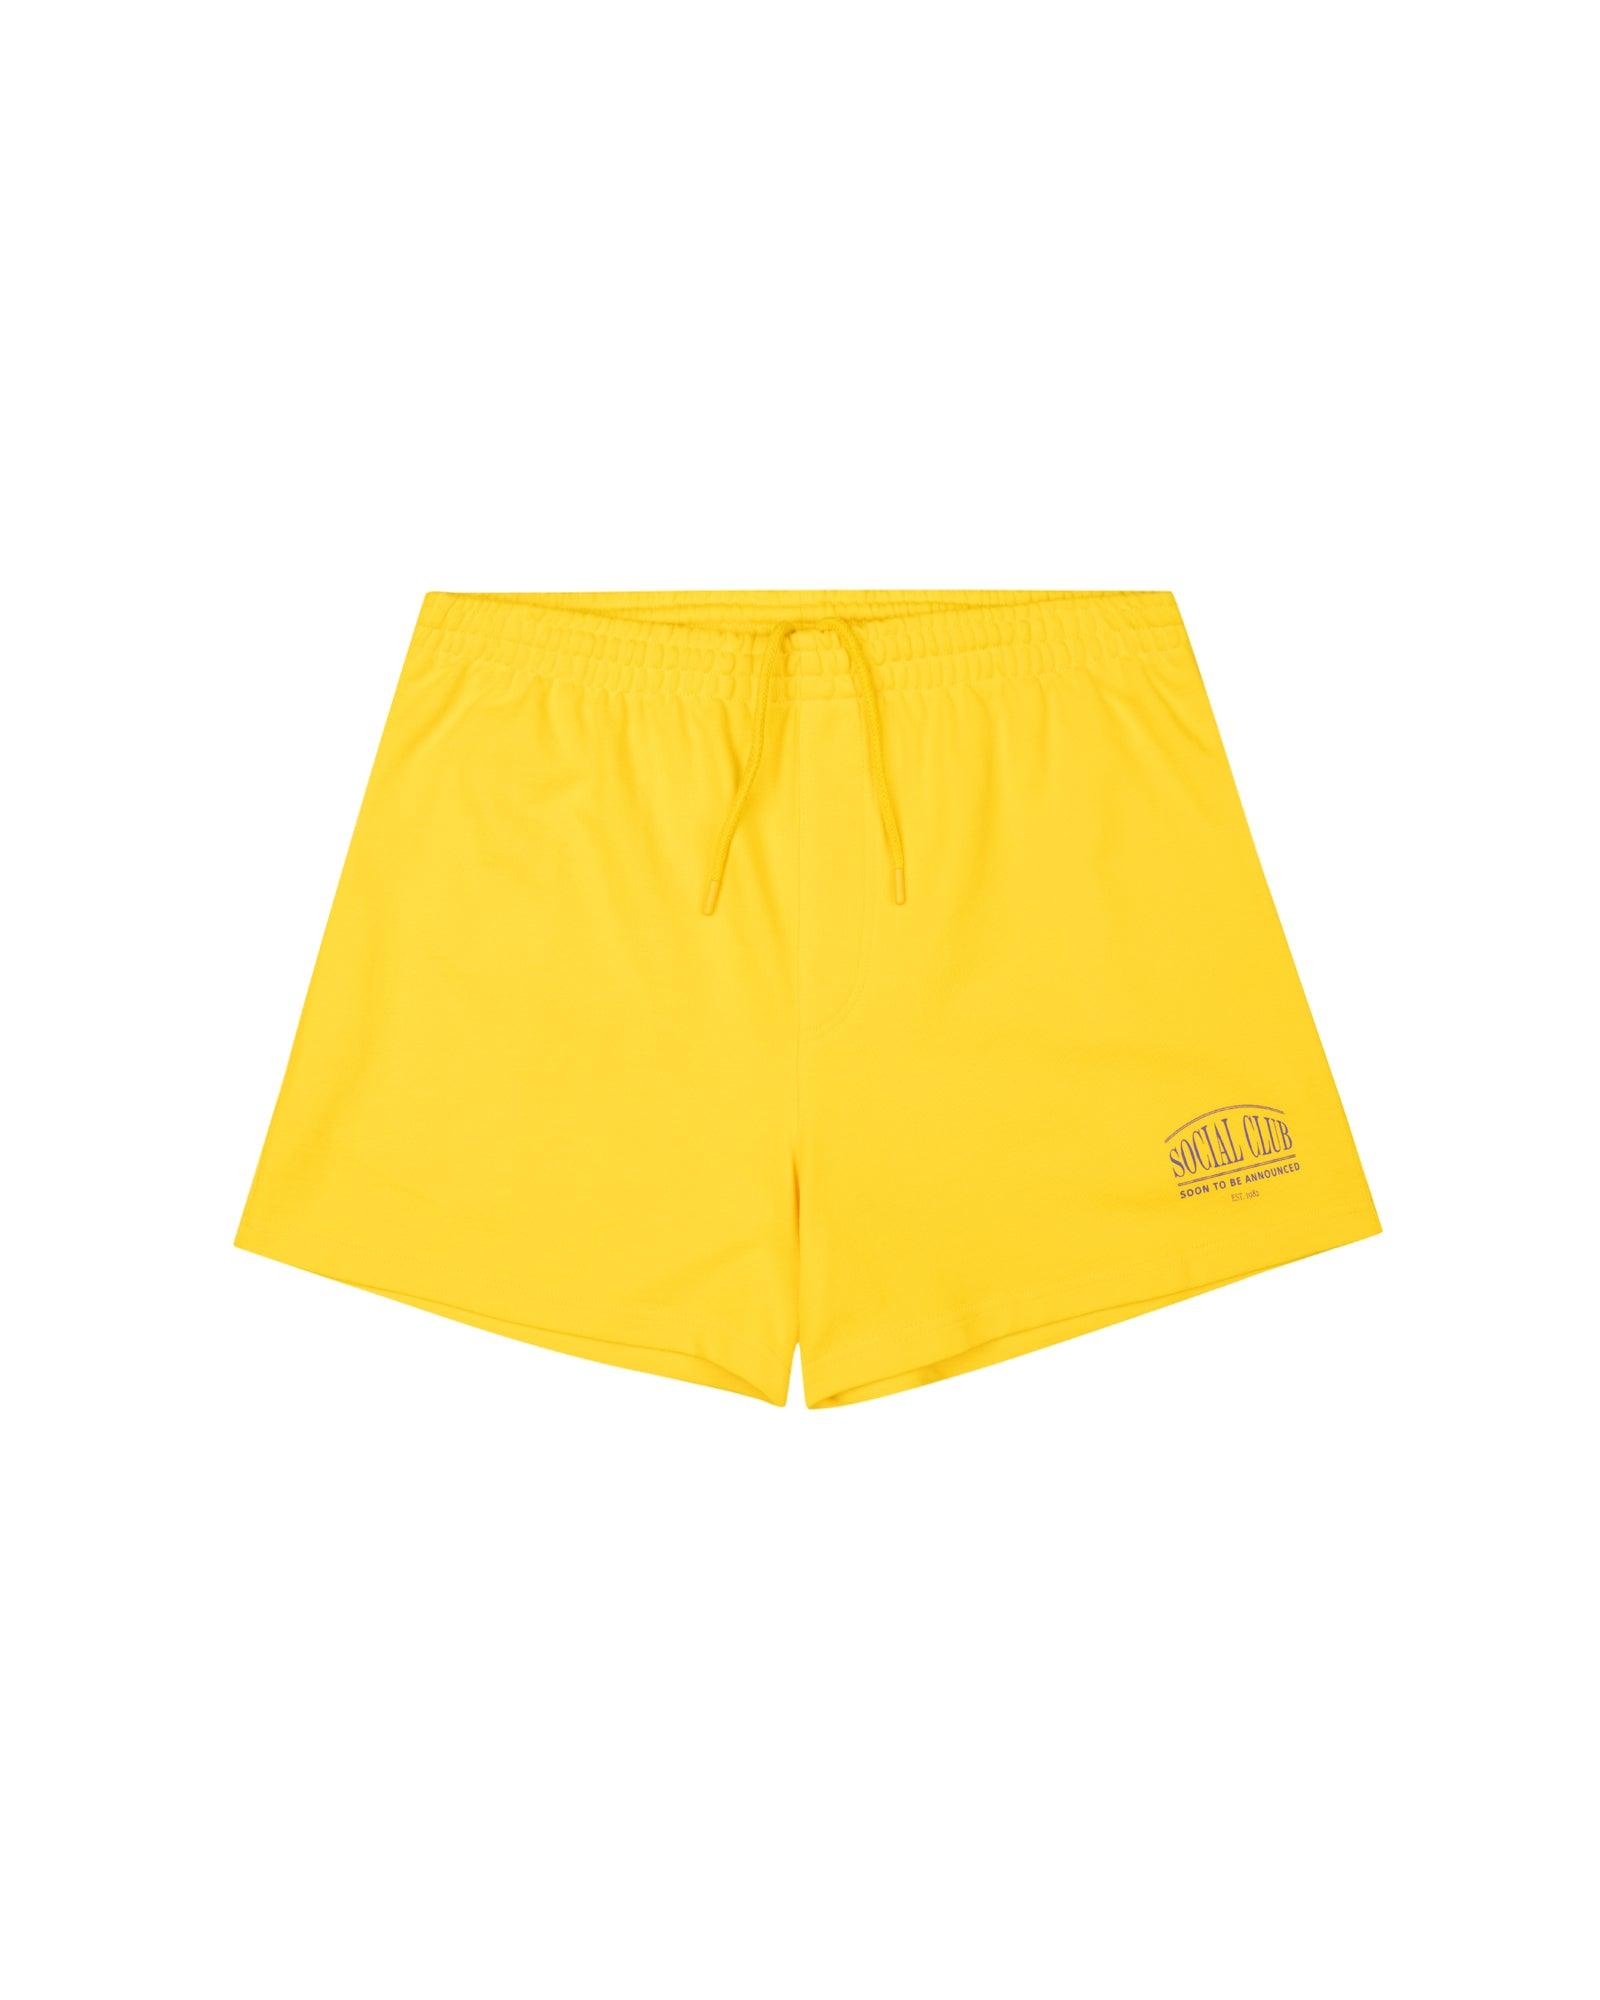 Alliance Shorts - SOON TO BE ANNOUNCED